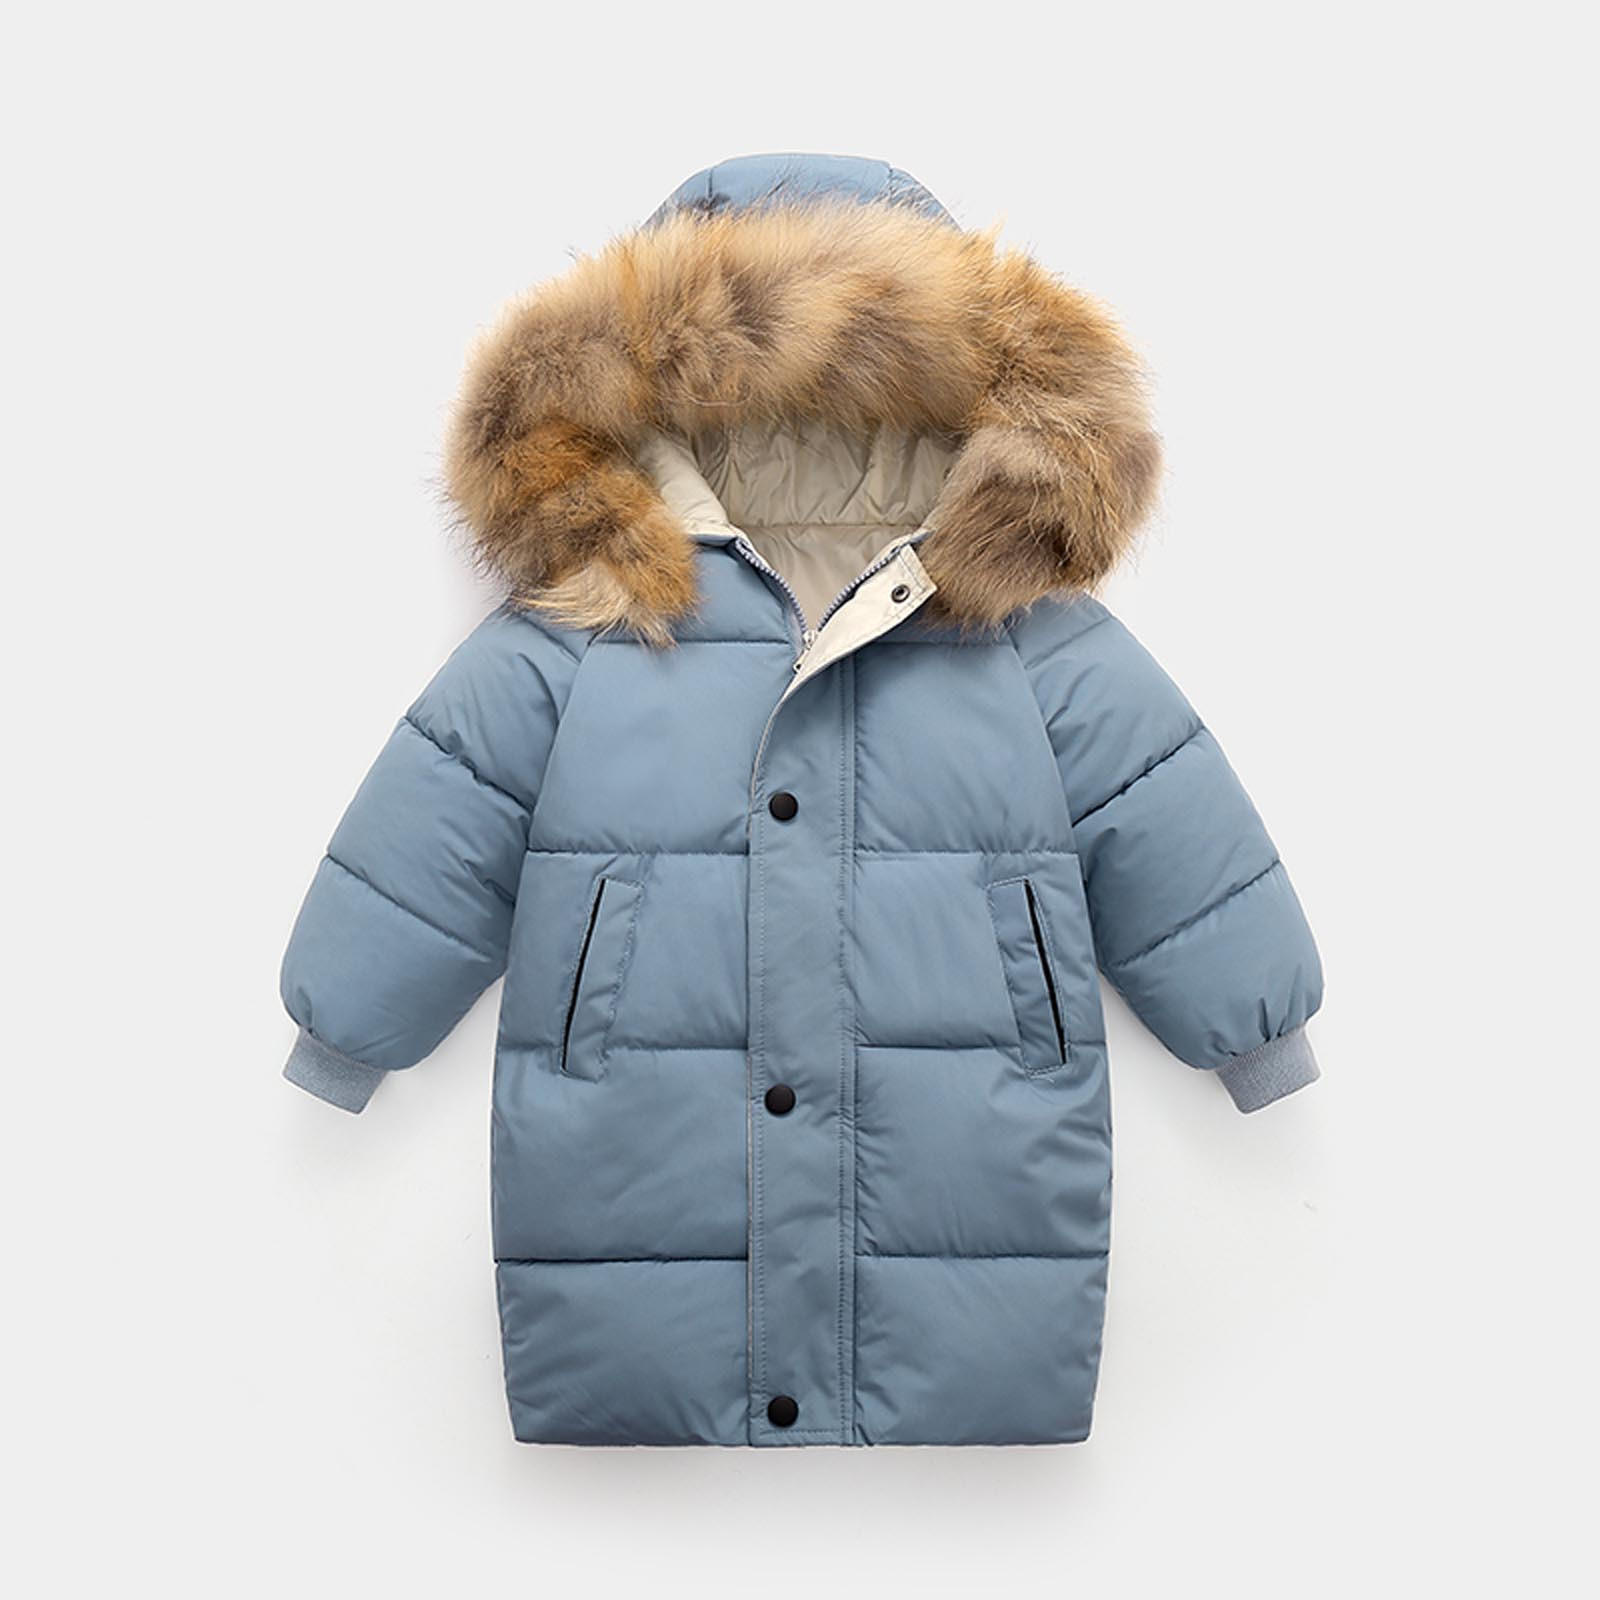 Verugu Toddler Baby Girls Boys Winter Coat Thicken Warm Jackets Baby Hooded Snow Outwear Coat Kids Thicken Warm Down Coat Winter Hooded Long Cotton Down Jackets Outerwears Blue, 4-5 Years - image 2 of 3